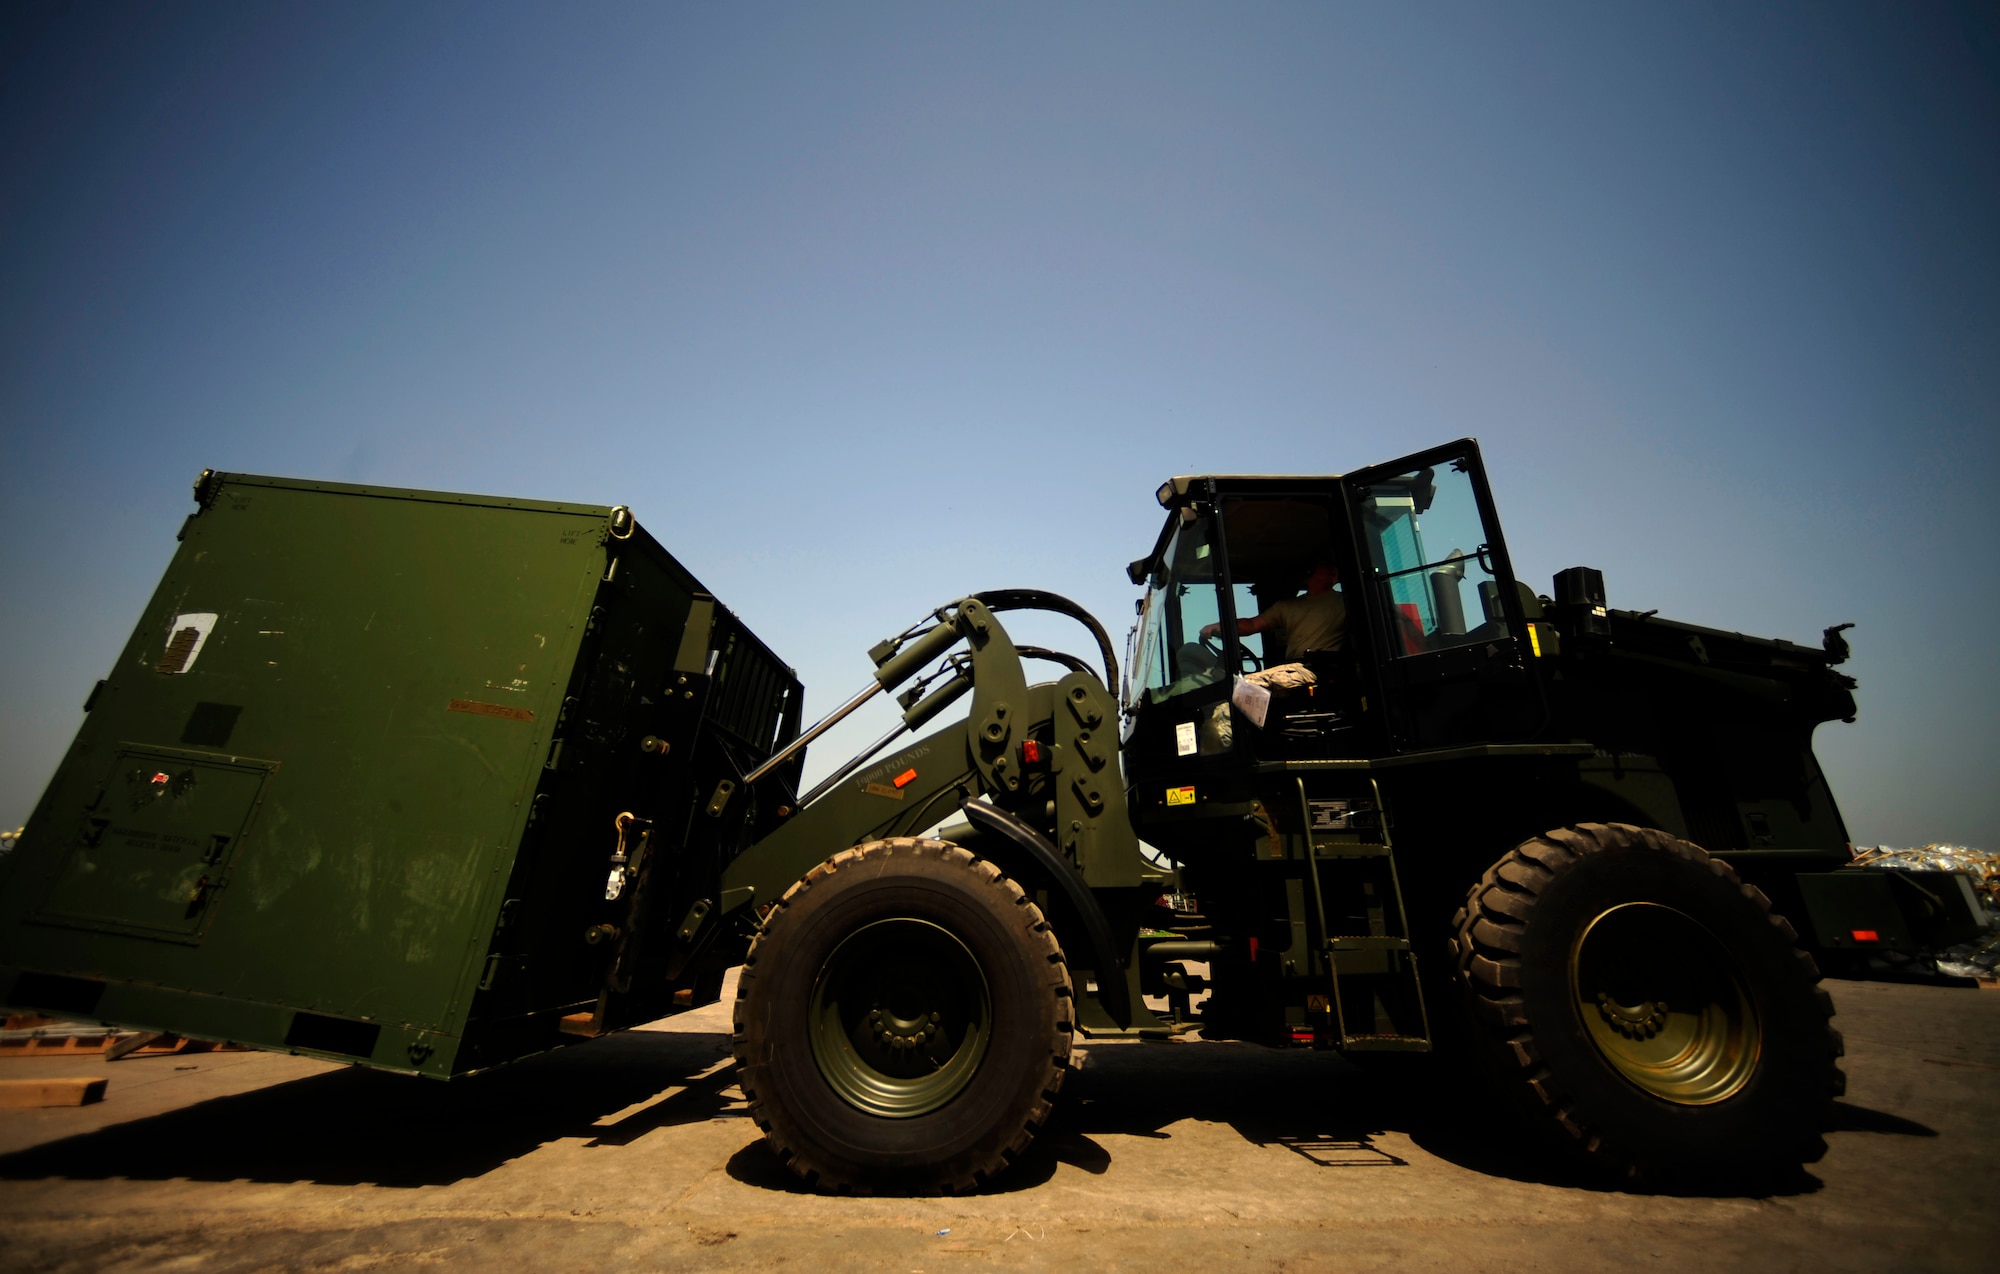 CHAKLALA AIR FORCE BASE, Pakistan – U.S. Air Force Airmen from the Contingency Response Element, 818th Contingency Response Group, Joint Base McGuire-Dix-Lakehurst, N.J., operates a forklift while transporting equipment containers off the flightline at Chaklala Air Base, Pakistan, on Aug. 28. The CRE arrived to take over responsibilities for loading and off loading U.S. aircraft with supplies all over Pakistan in support of flood relief efforts. (U.S. photo taken by Staff Sgt. Andy M. Kin) (released)